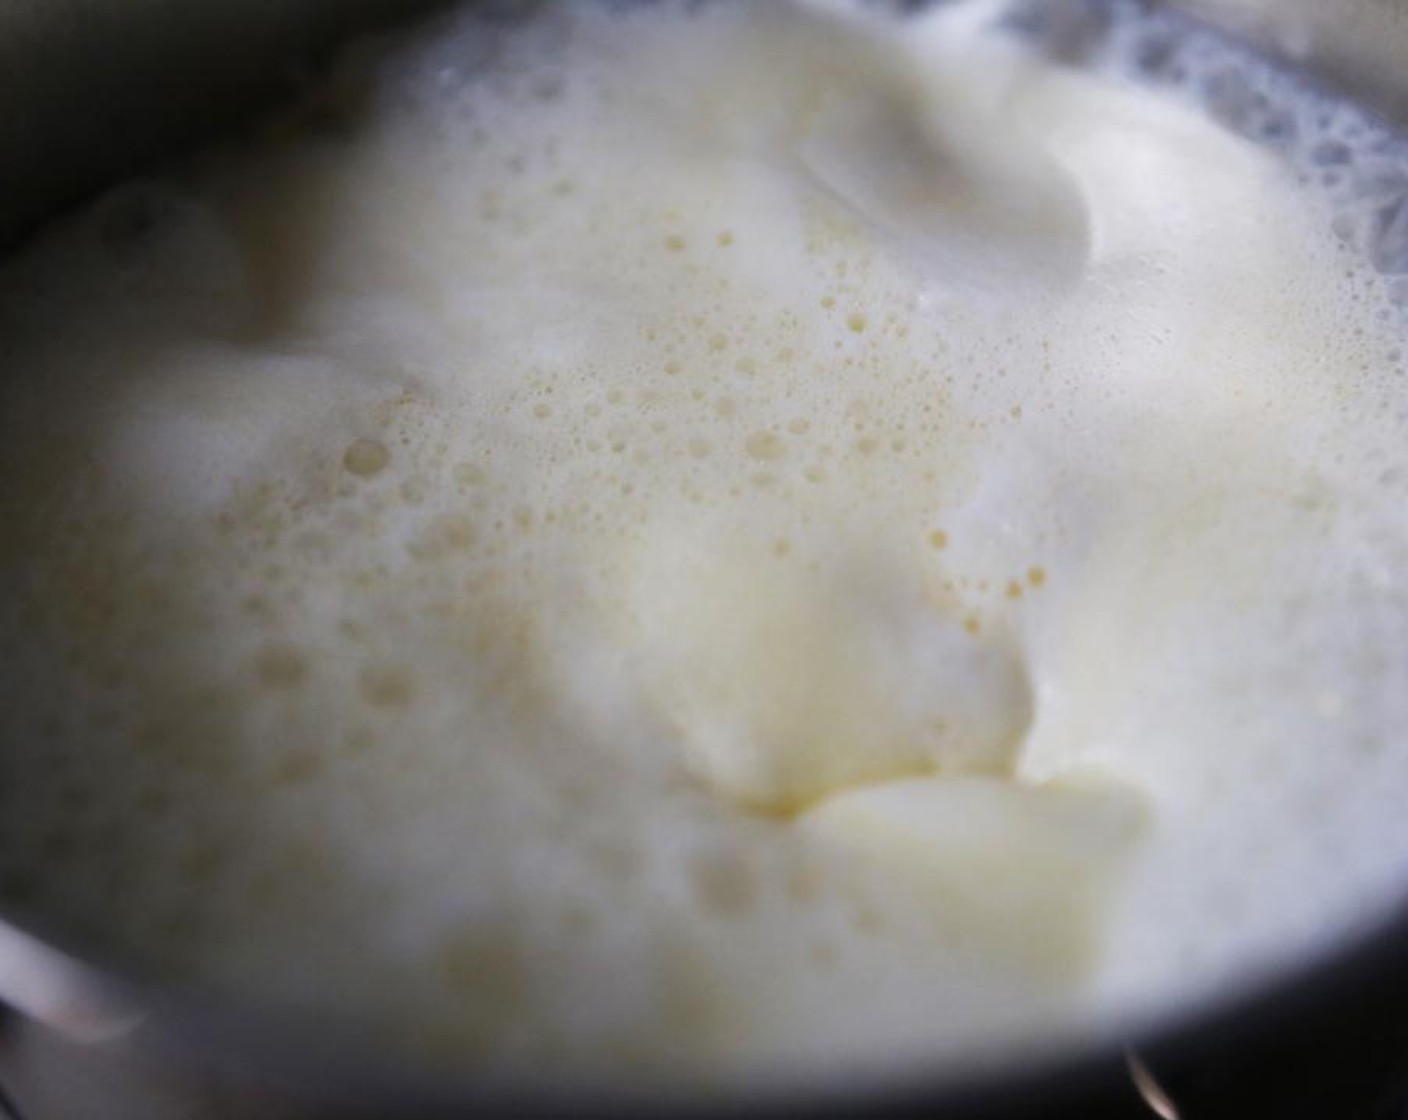 step 4 Combine the  Butter (1/2 cup) and Milk (1 cup) in a saucepan and melt the butter over low heat. Bring to a boil, then remove from the heat.